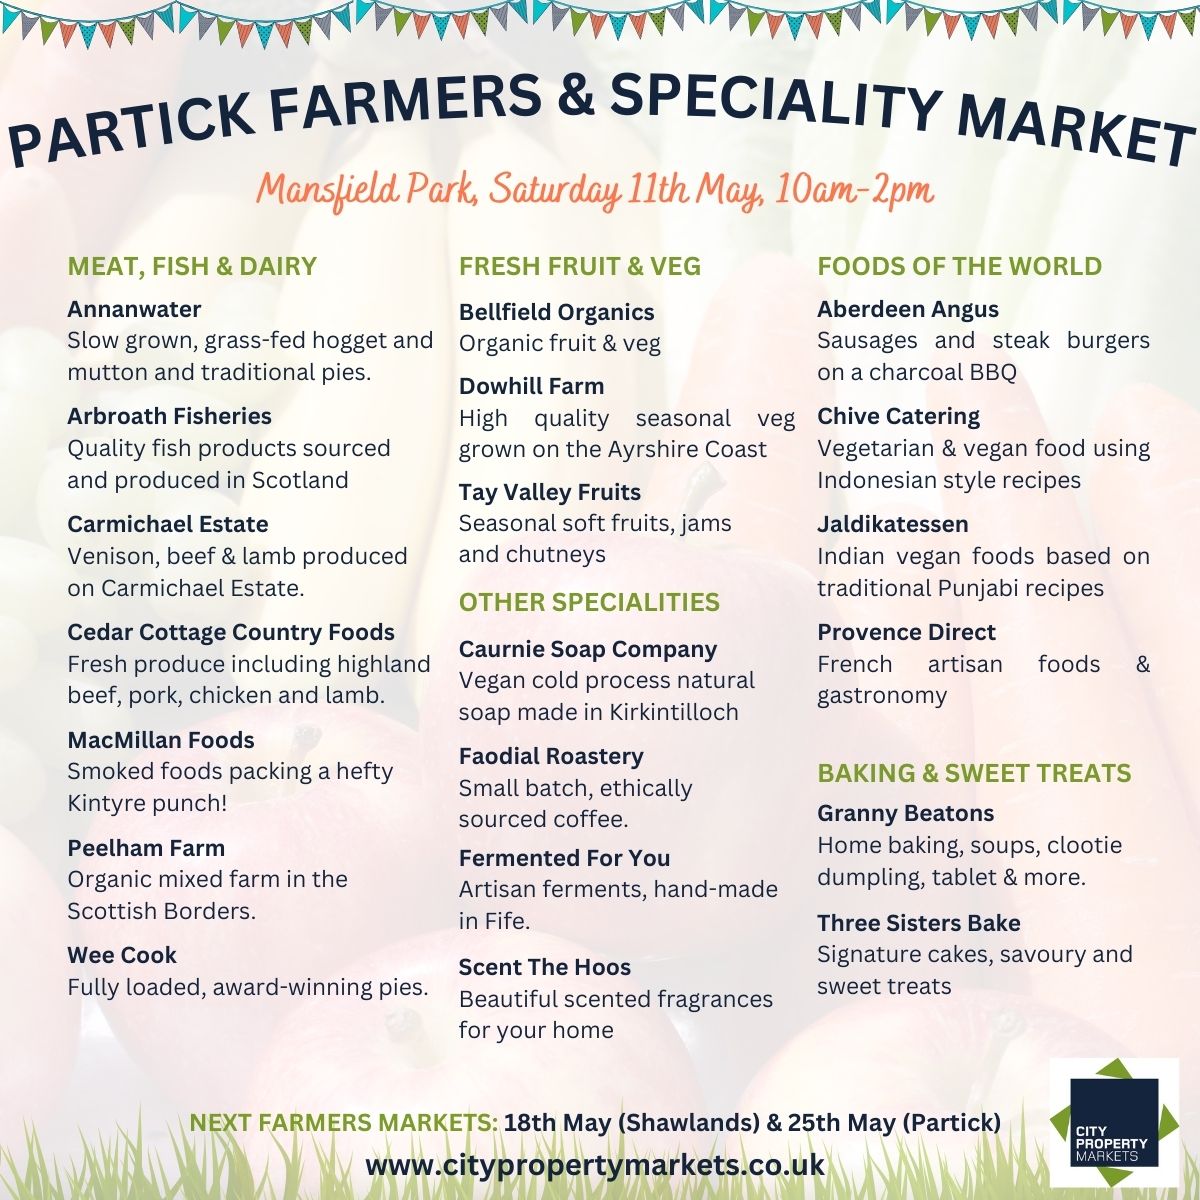 Come along and enjoy the sunshine in Partick tomorrow - you'll find these traders at Mansfield Park from 10am-2pm! ☀️
citypropertymarkets.co.uk/markets/farmer…
#CityPropertyMarkets #GlasgowMarkets #Glasgow #FarmersMarkets #GlasgowFarmersMarkets #GlasgowWestEnd #Partick #ShopLocal #WhatsOnGlasgow